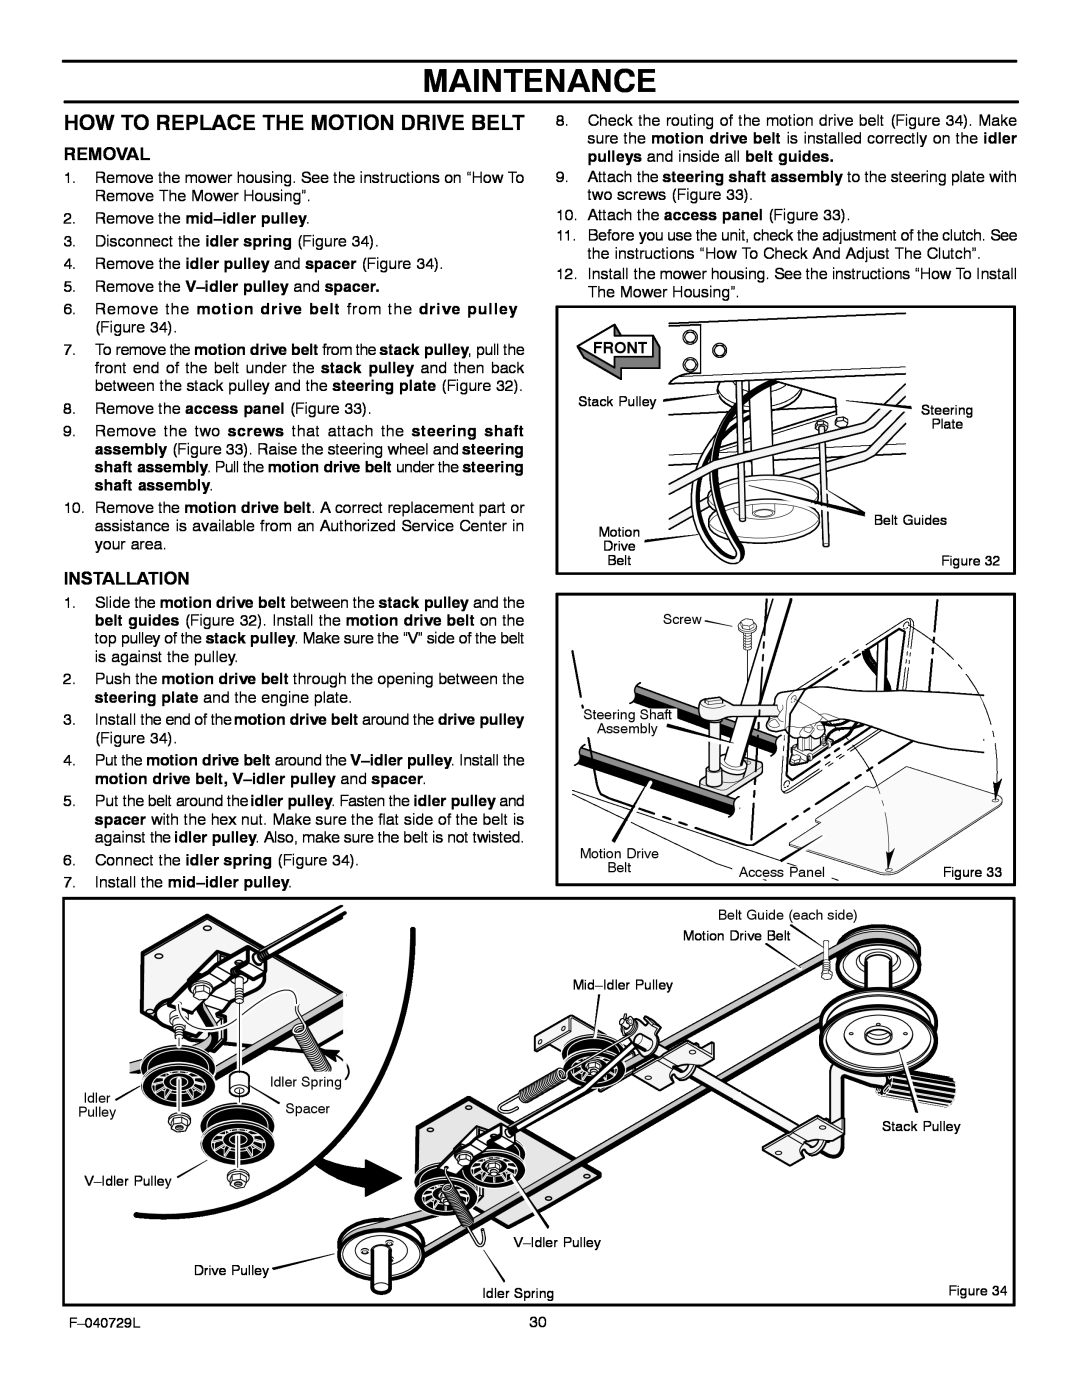 Murray 425620x92A manual Maintenance, How To Replace The Motion Drive Belt, Removal, Installation 